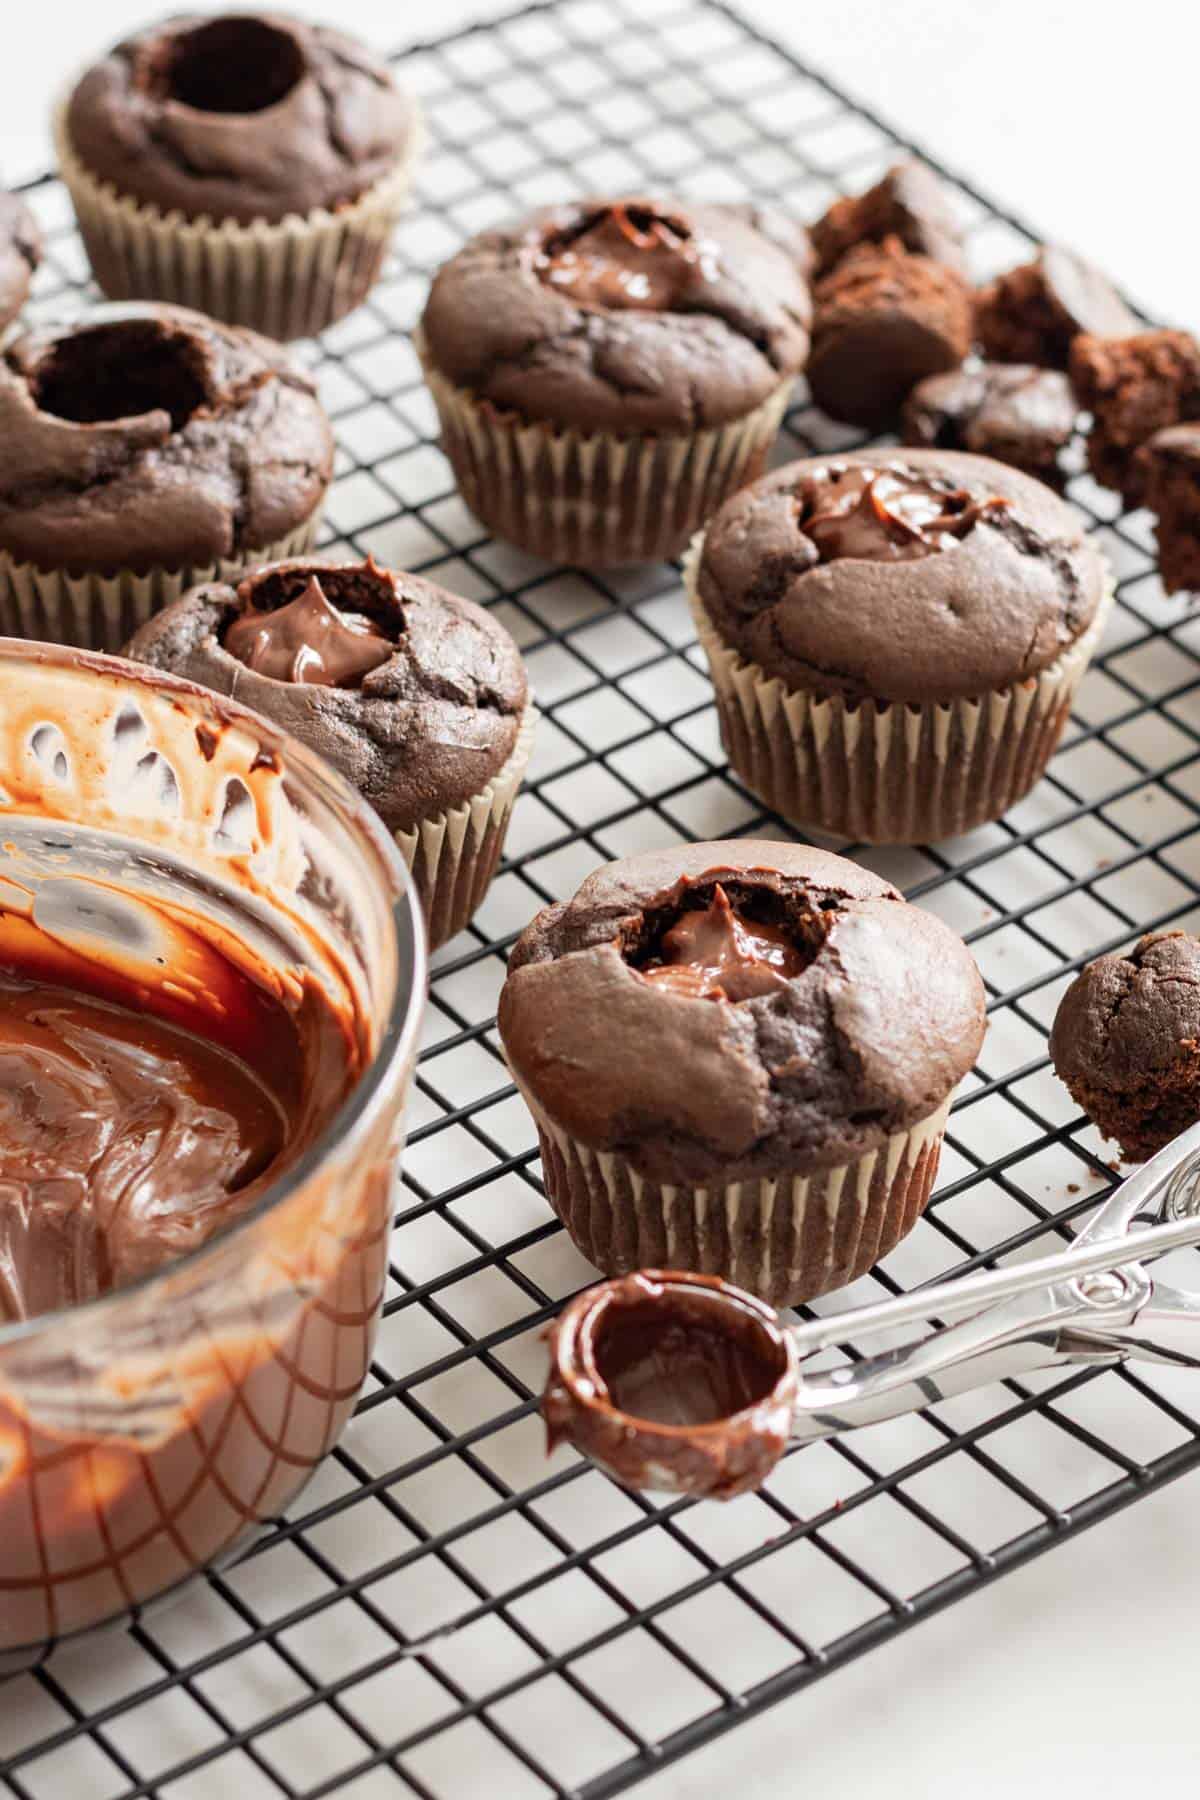 chocolate cupcakes with chocolate filling sitting on a cooling rack